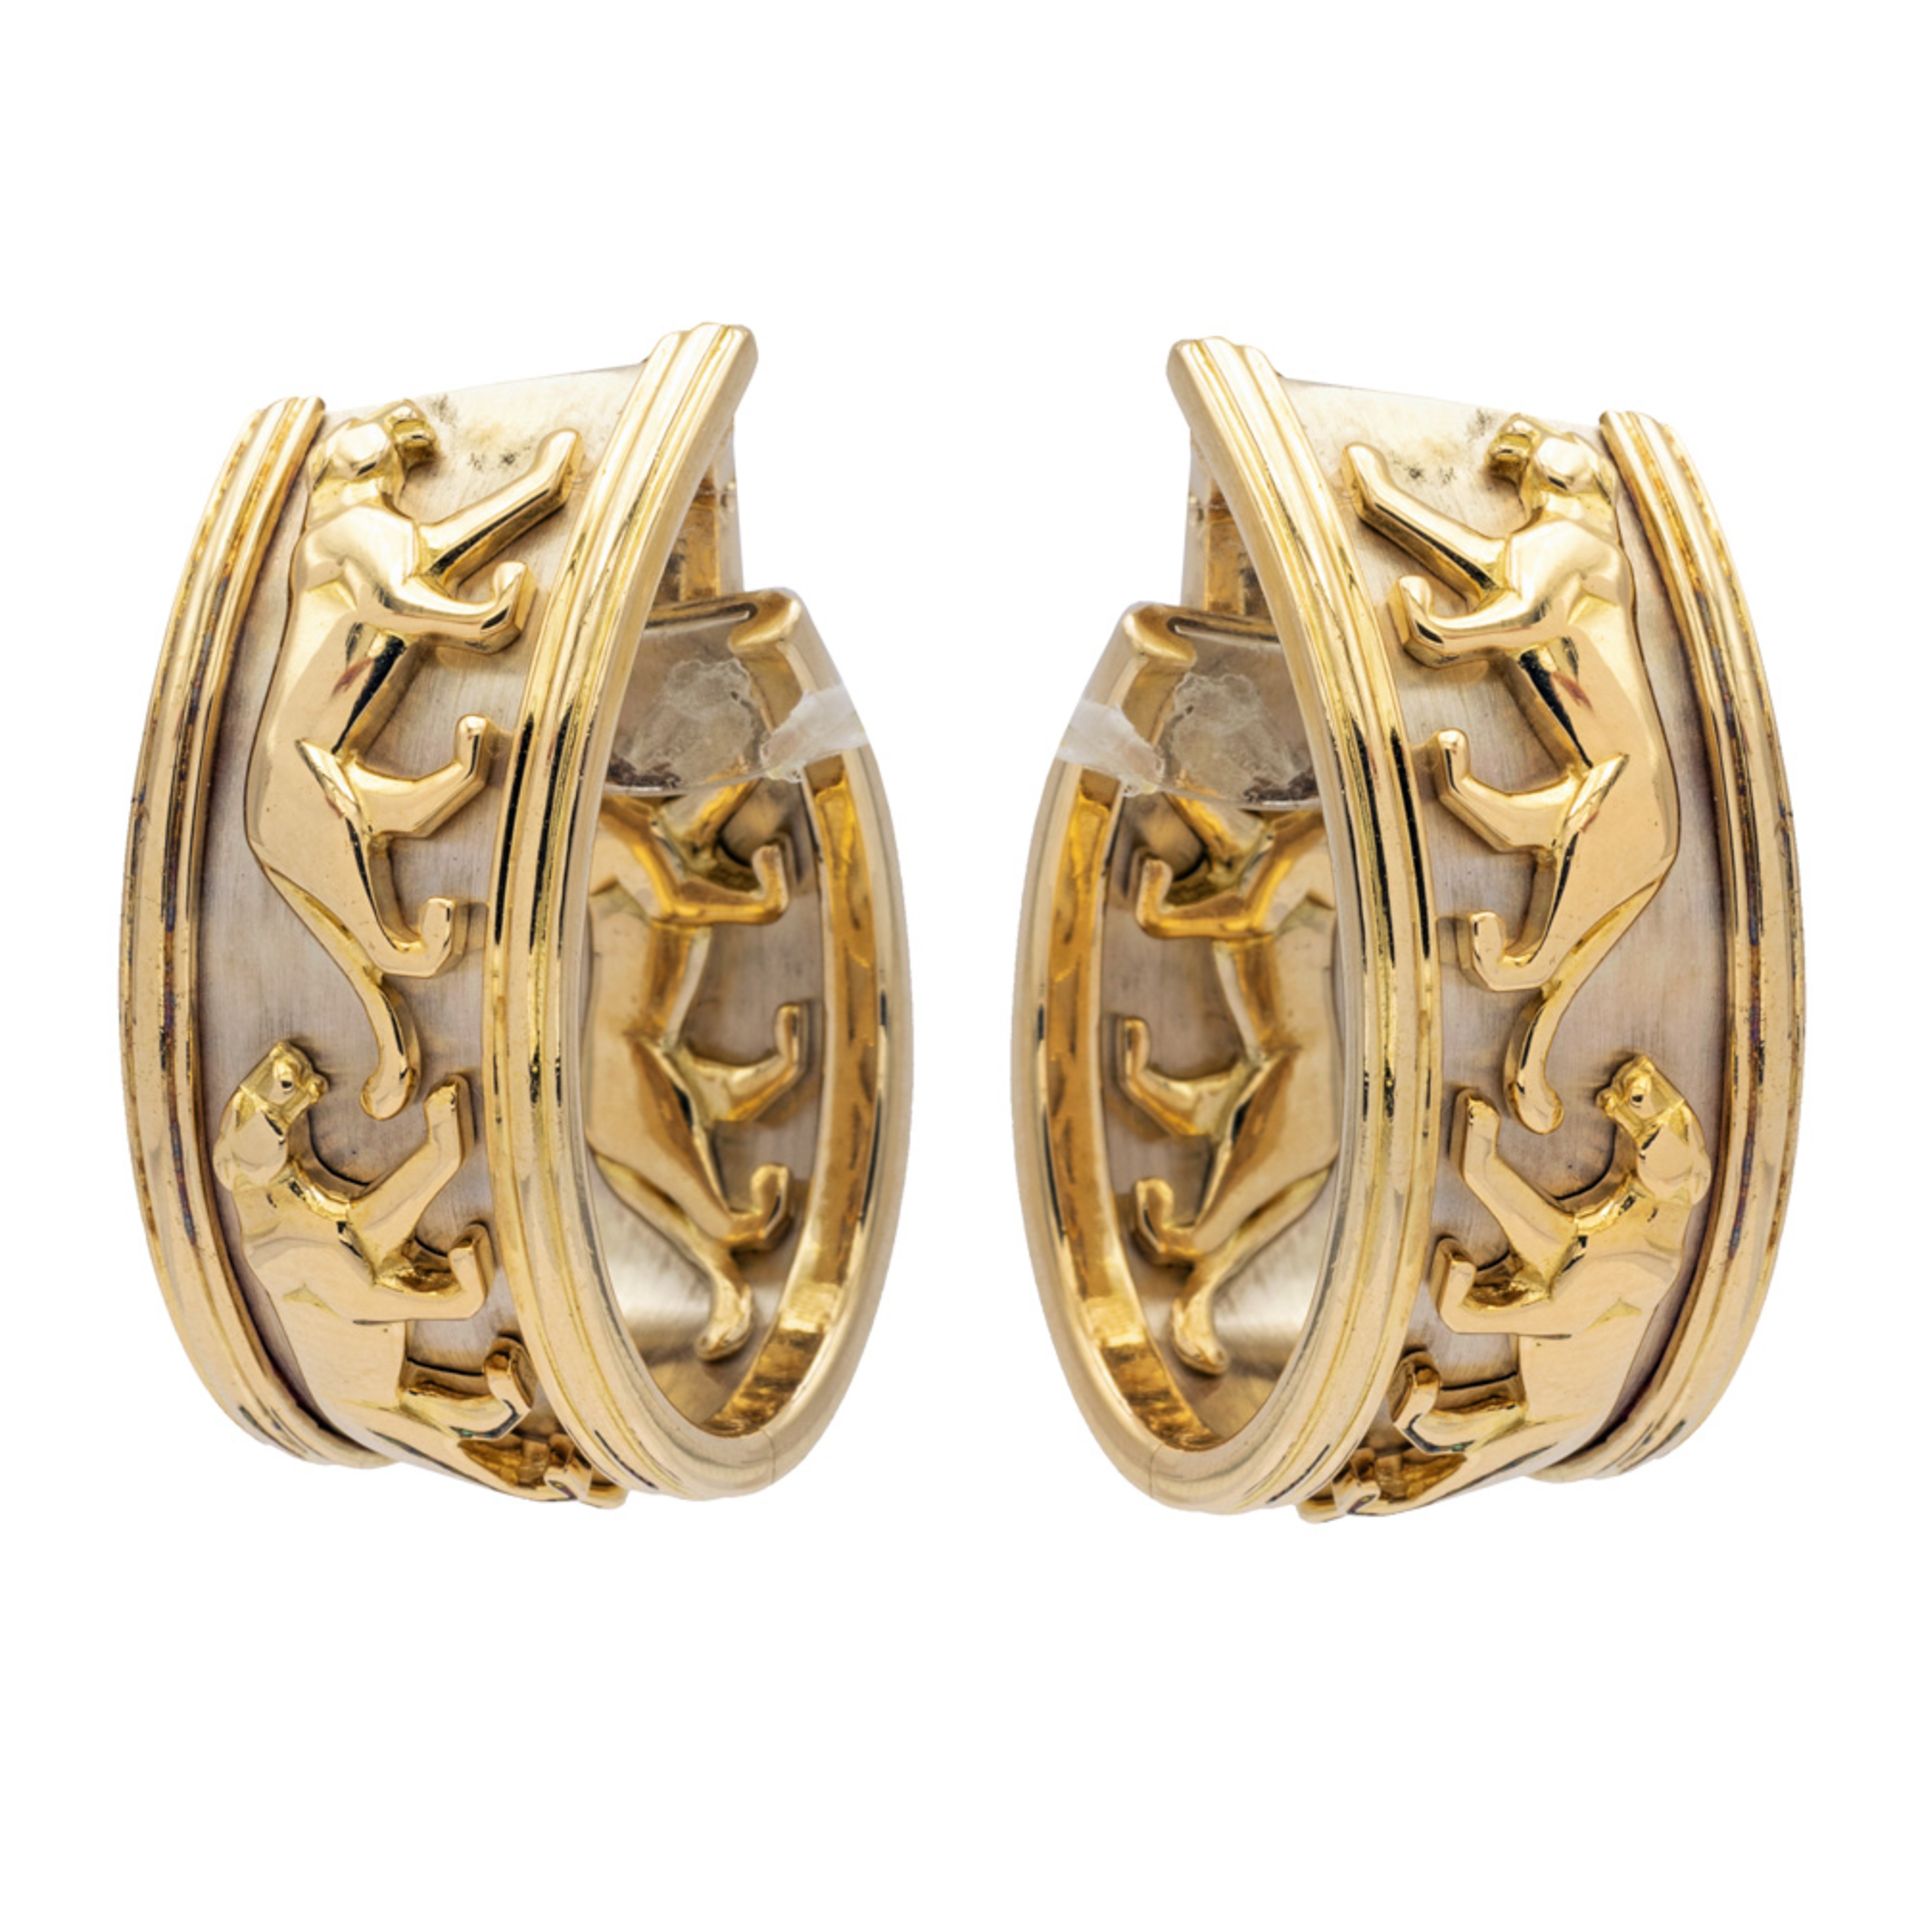 Cartier Panthere collection earrings